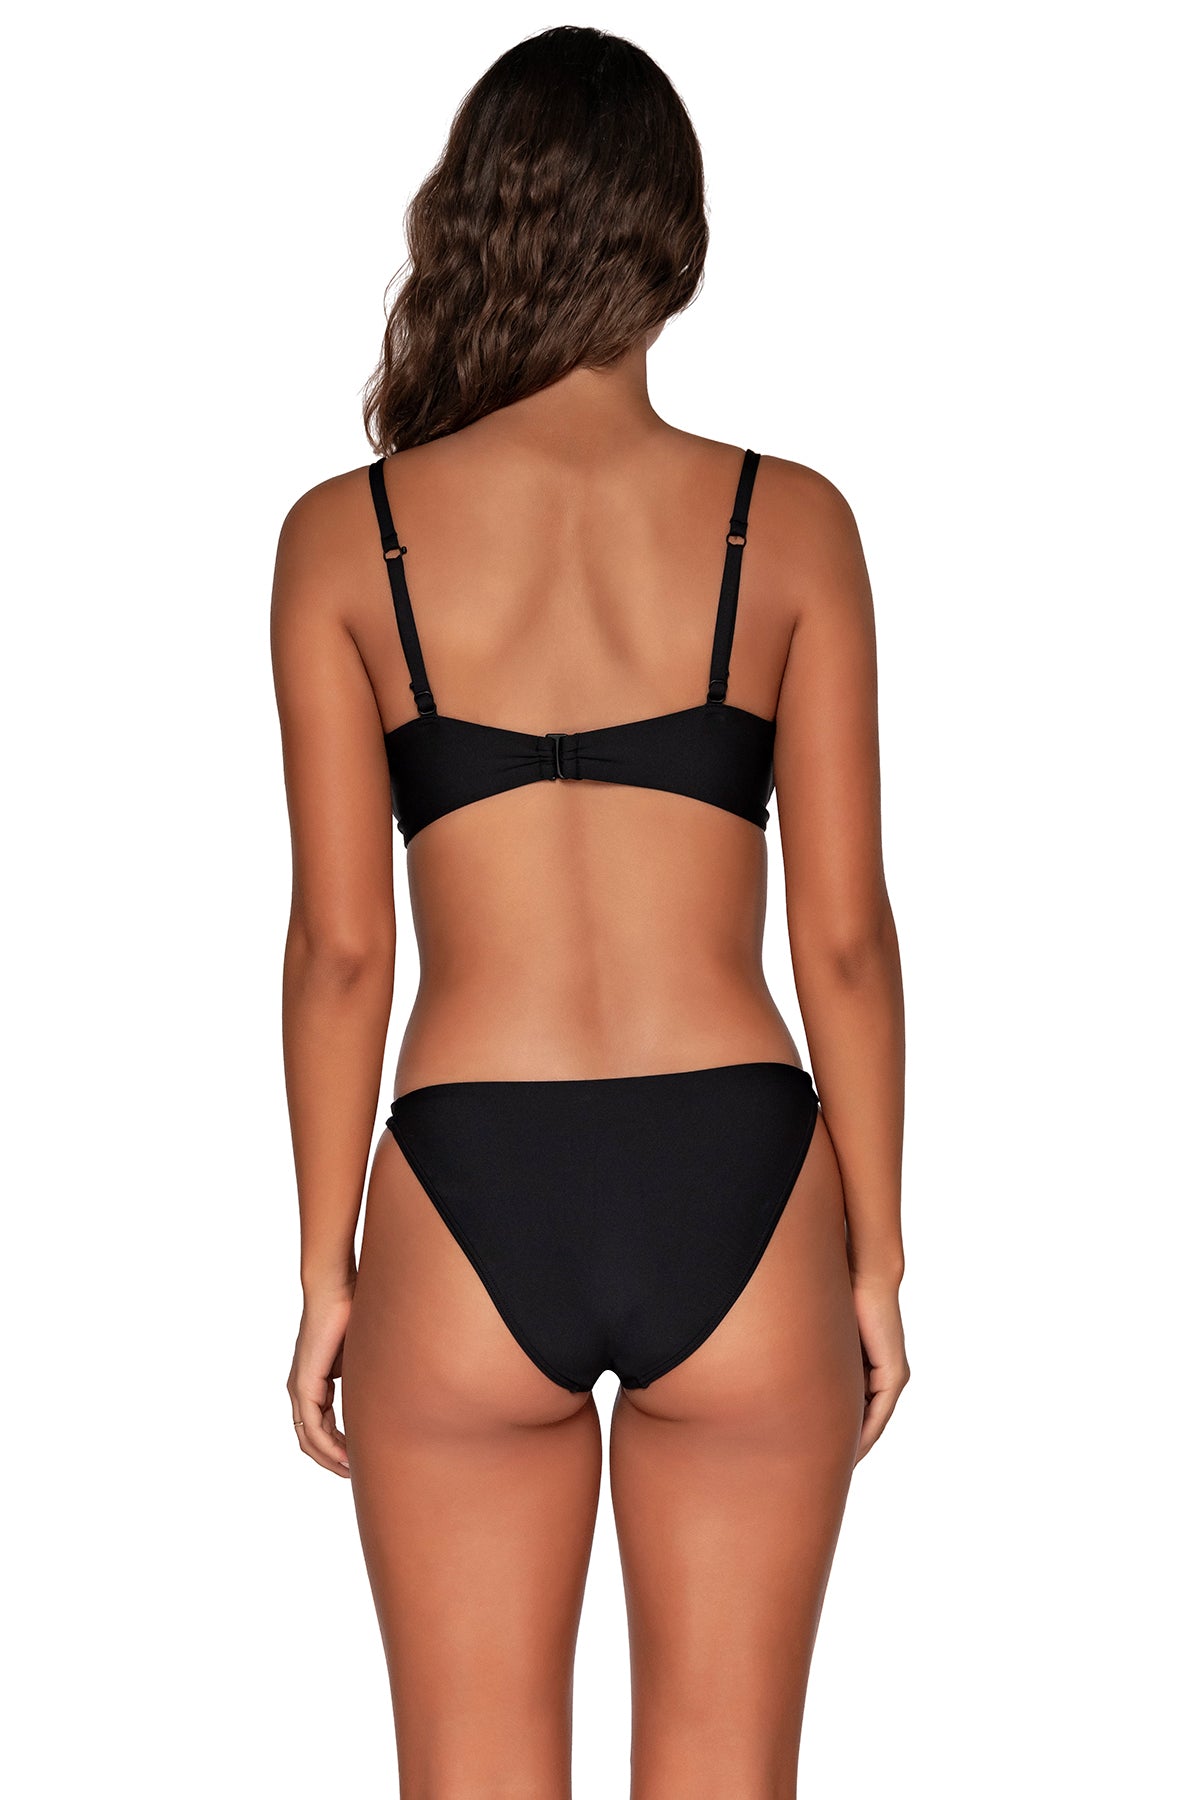 Back view of Swim Systems Black Leah Bottom